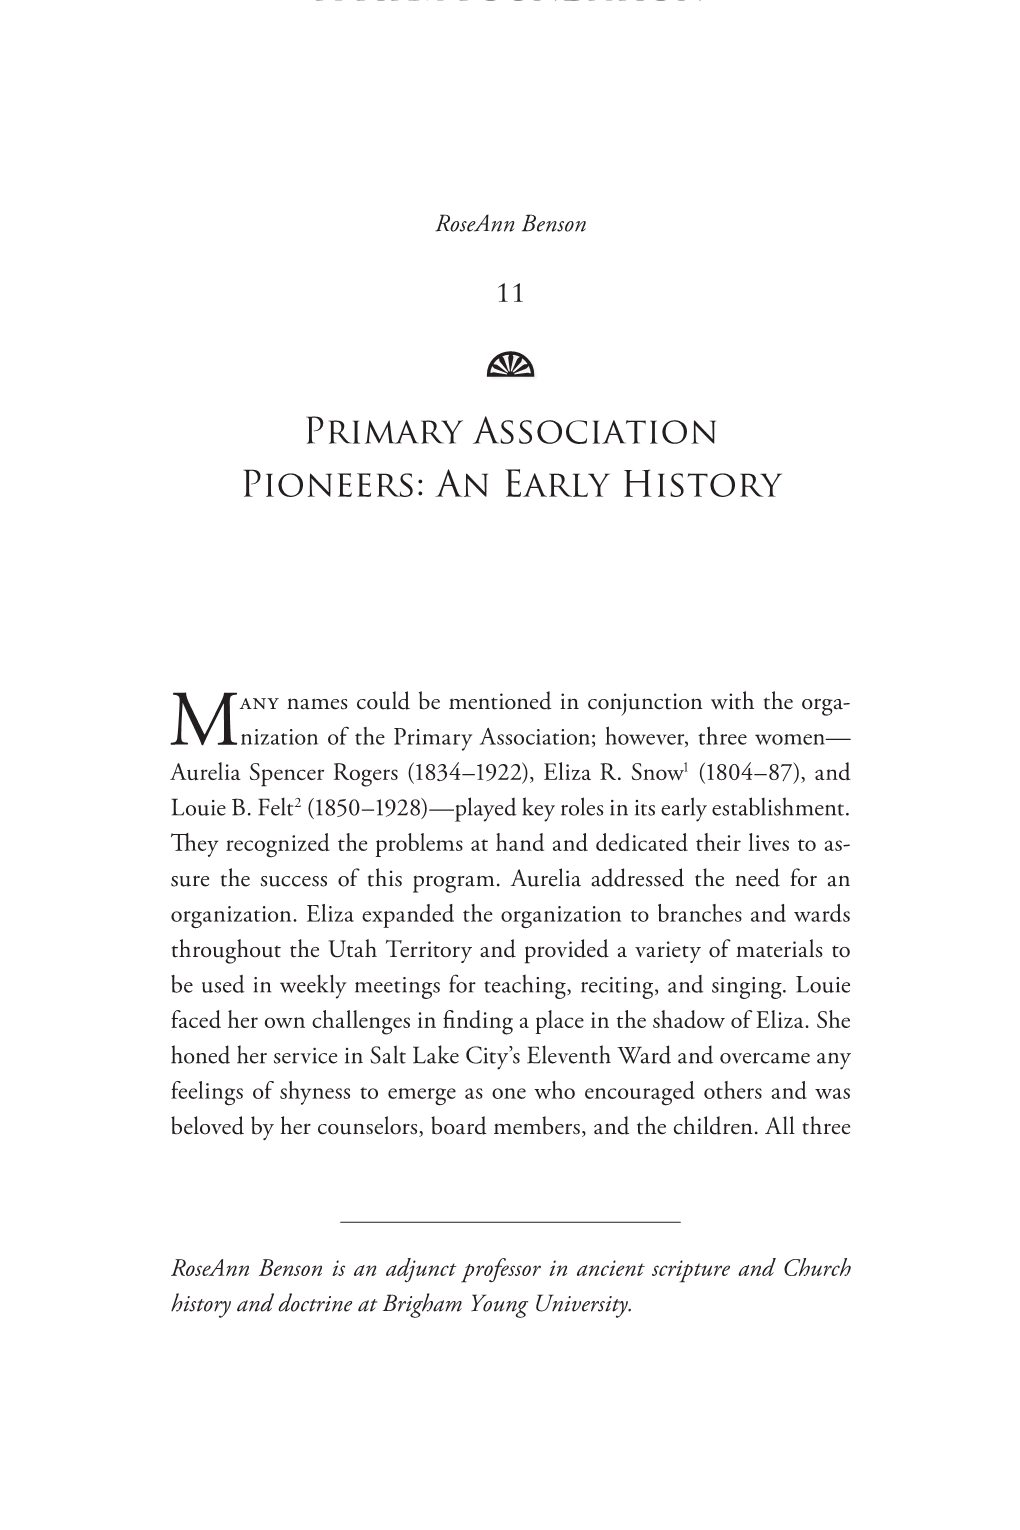 Primary Association Pioneers: an Early History